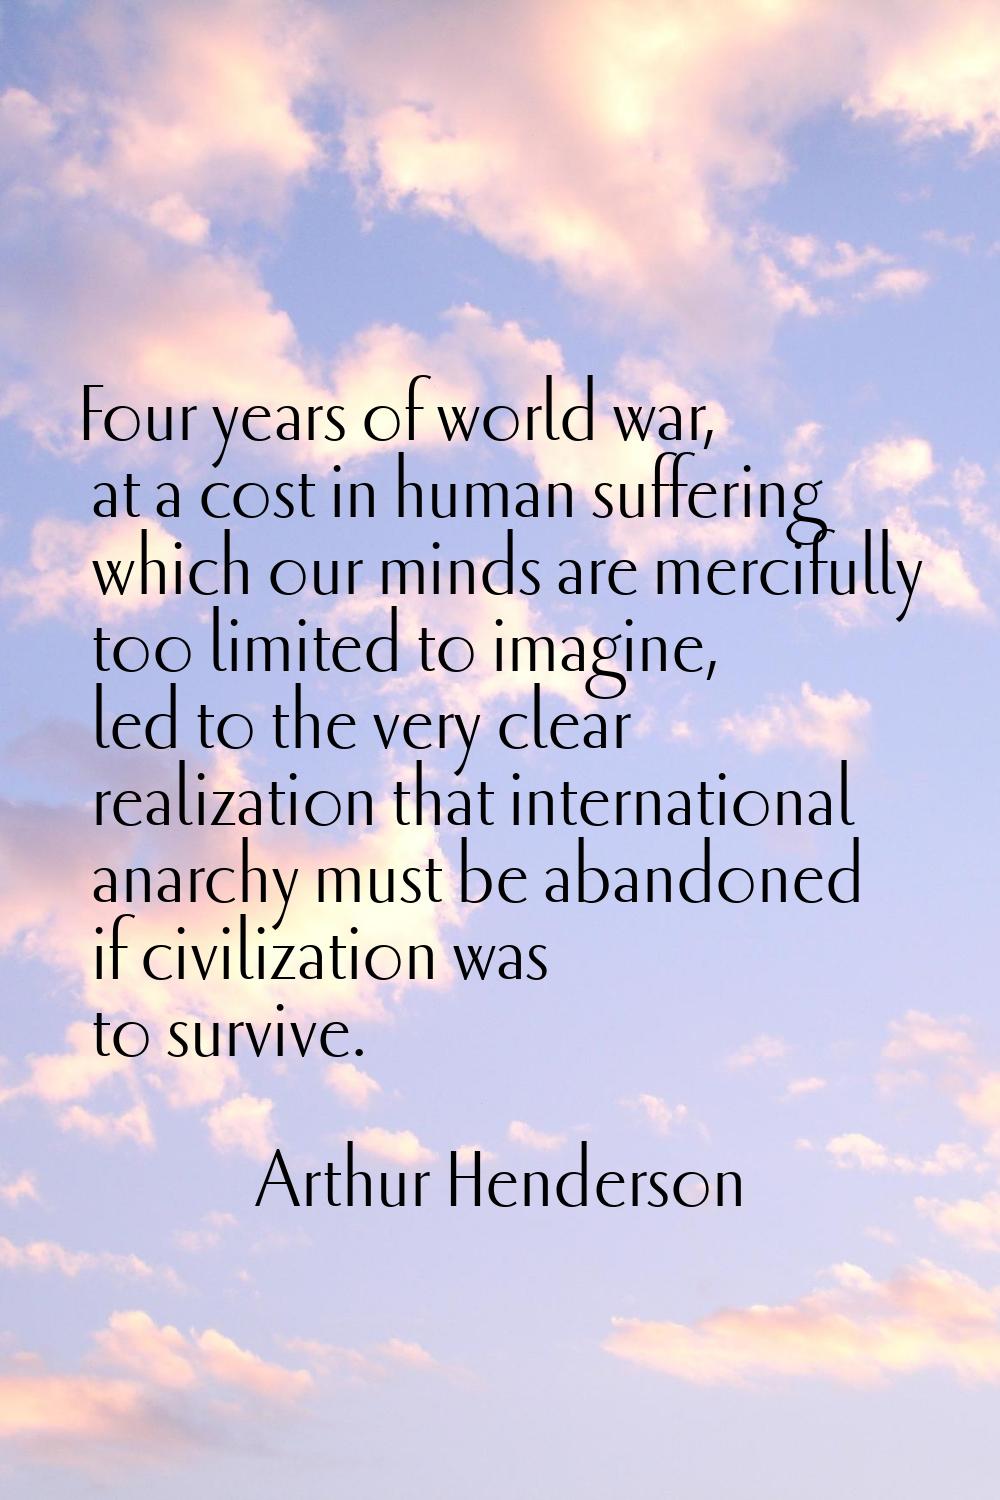 Four years of world war, at a cost in human suffering which our minds are mercifully too limited to